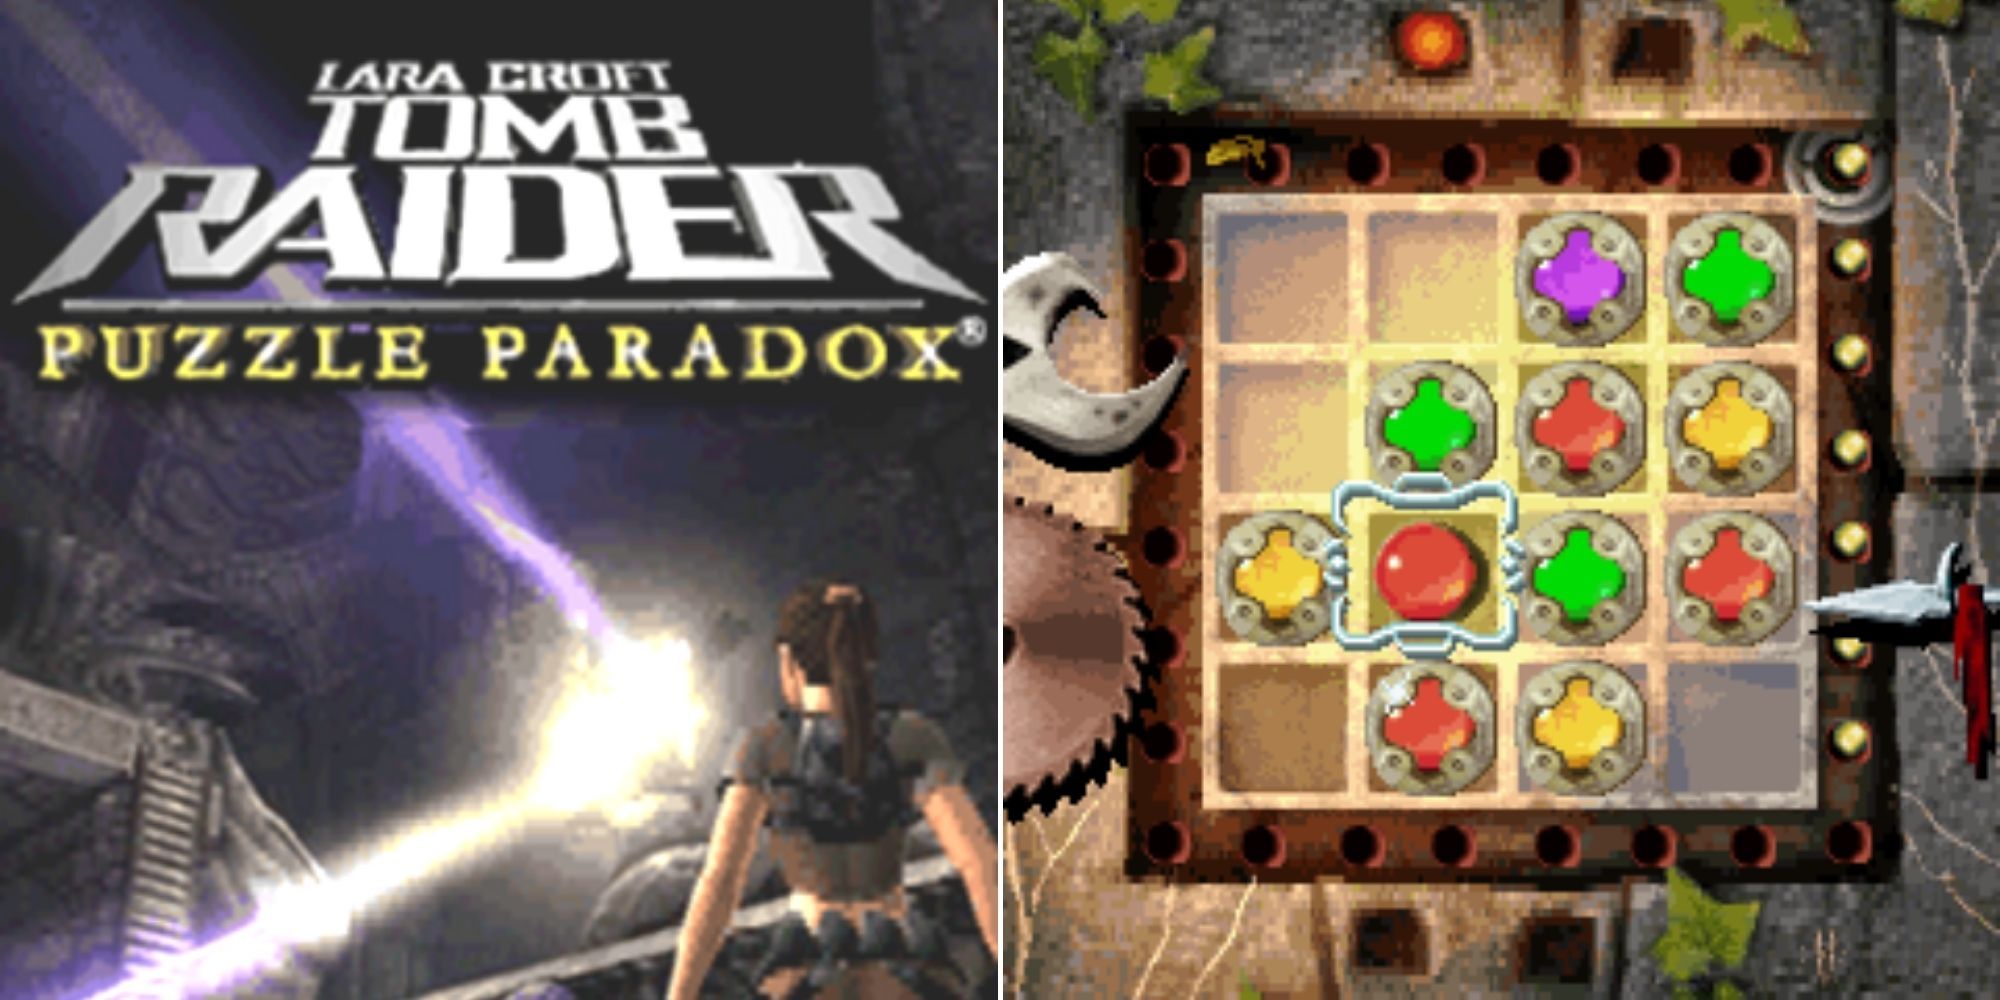 Tomb Raider: Puzzle Paradox Cover Art  and one of the puzzles in the game That Involves Matching Colors On A Grid